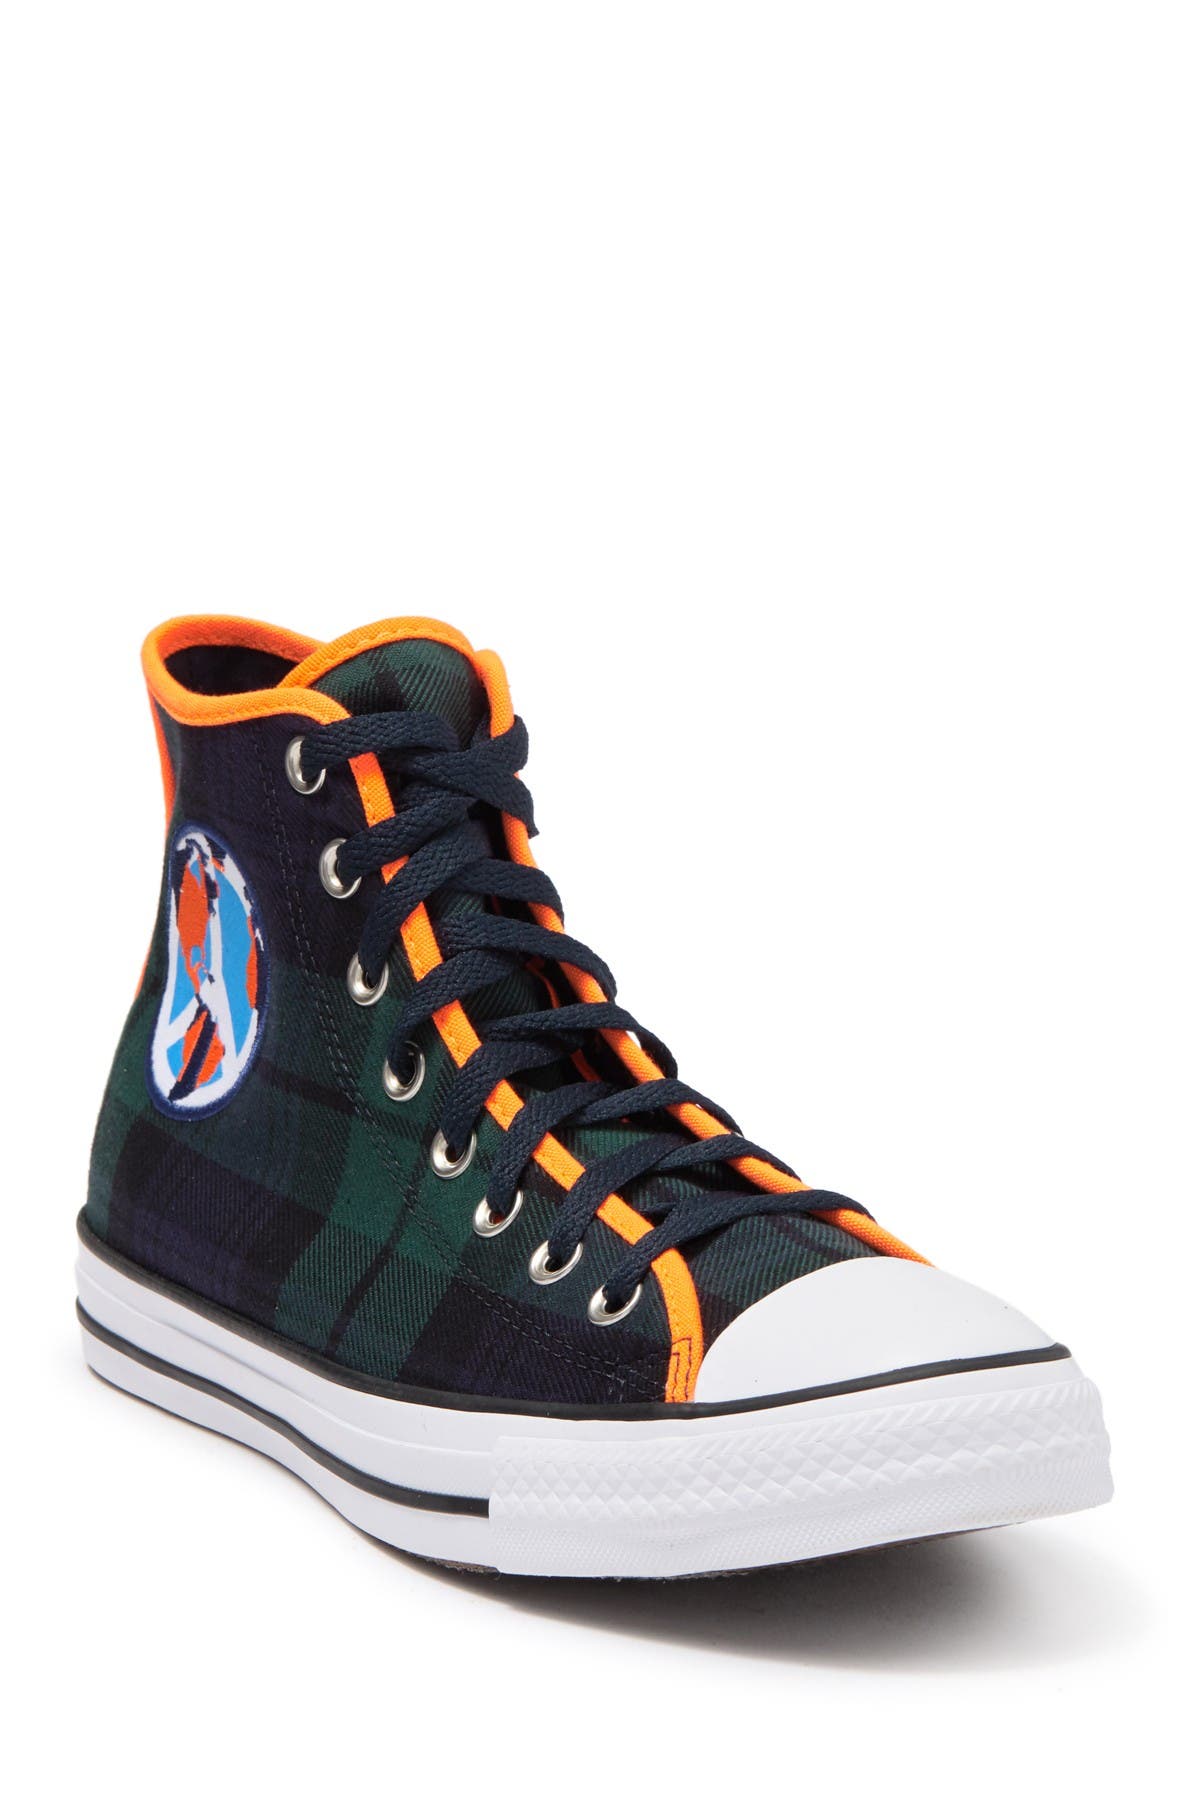 converse peace sign sneakers